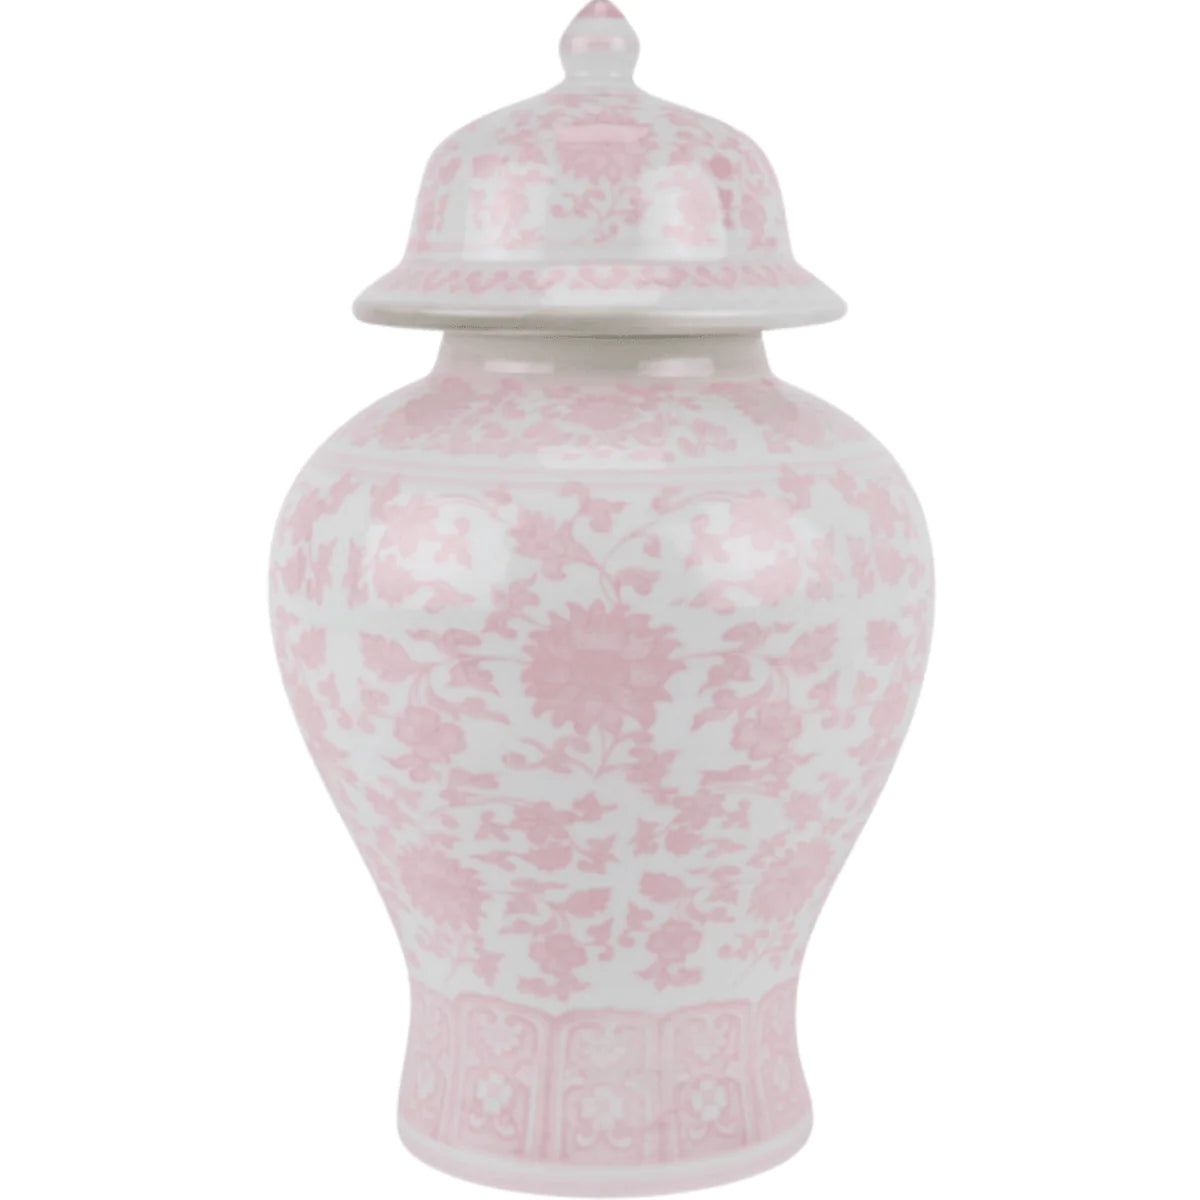 Small Pink & White Floral Porcelain Ginger Jar | The Well Appointed House, LLC